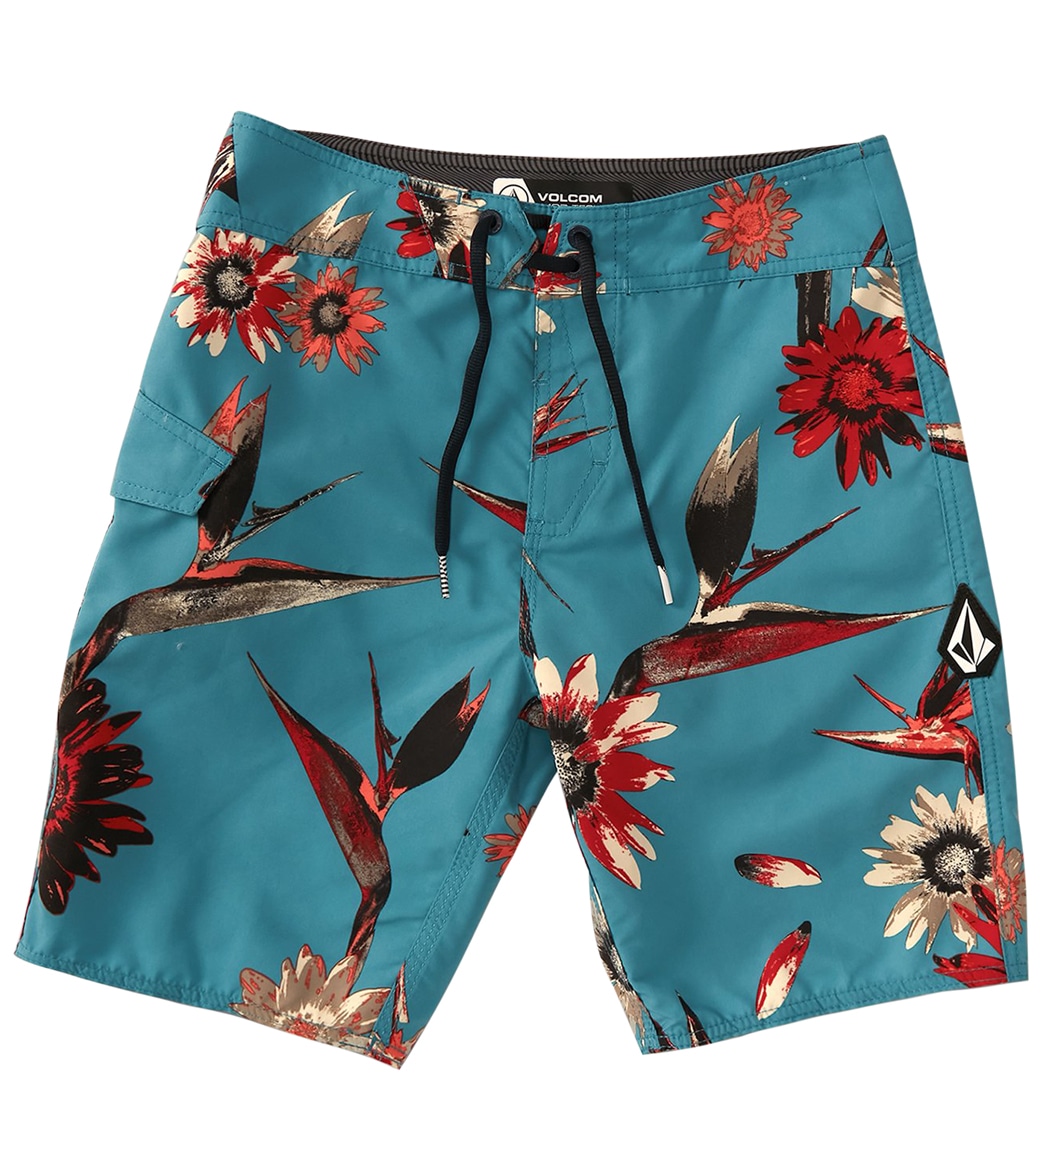 Volcom Boys' Mod Distraction Boardshorts Toddler - Storm Blue 2T Polyester - Swimoutlet.com